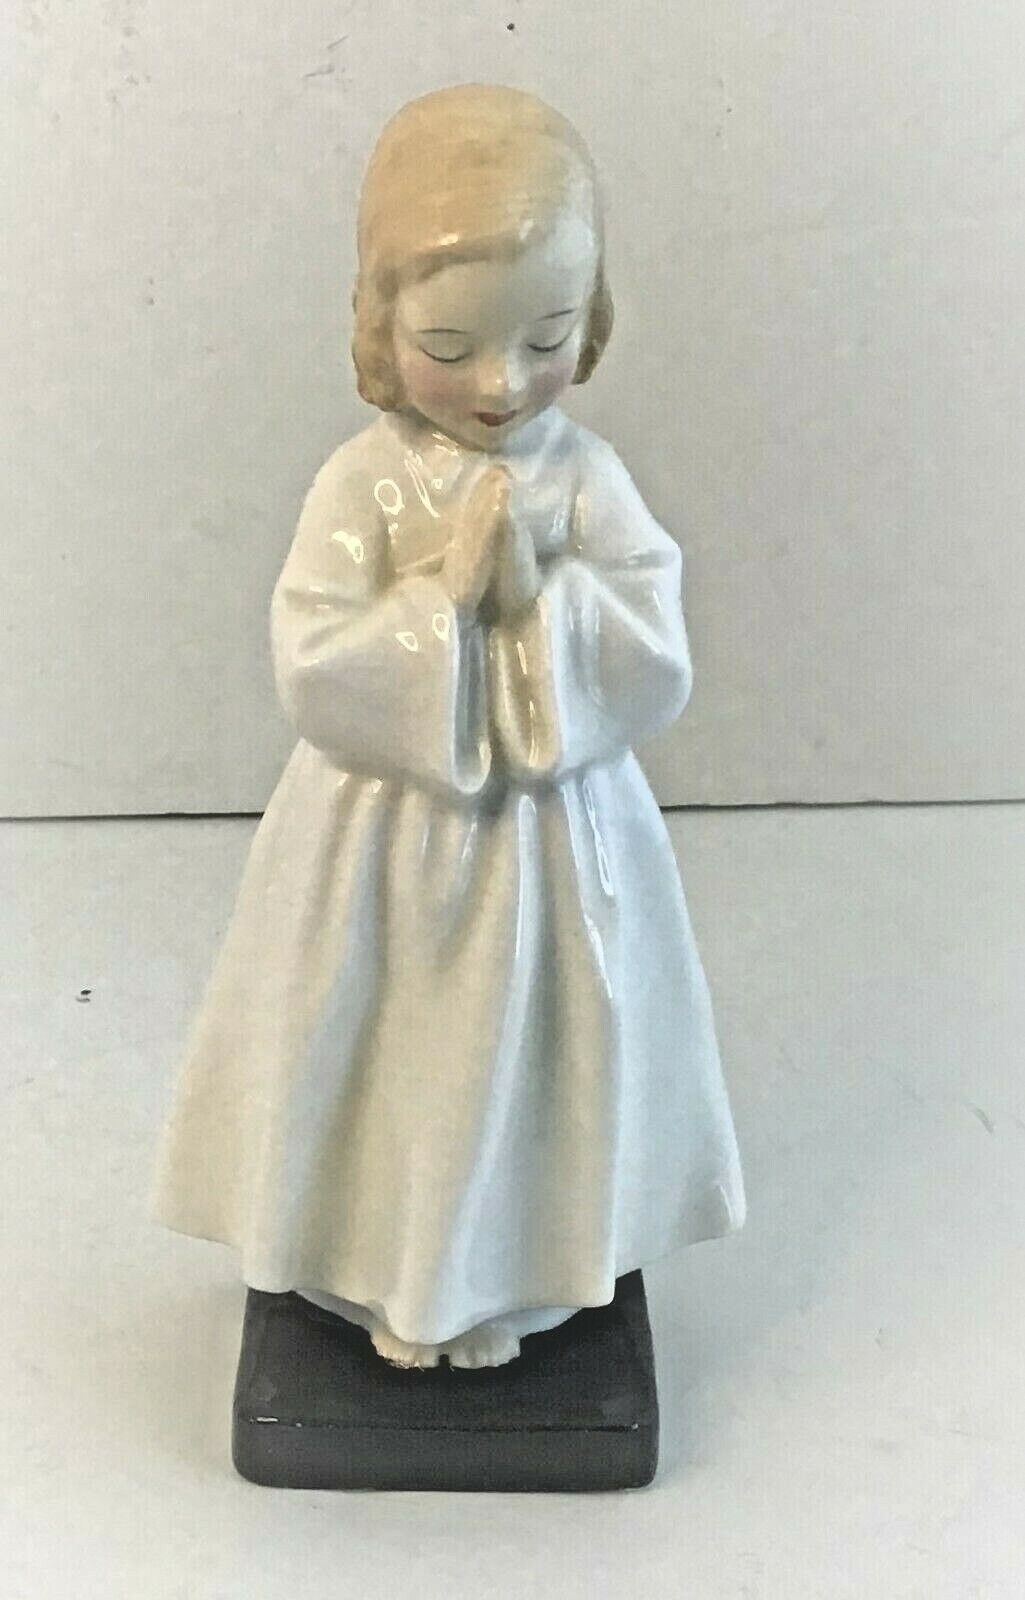 Royal Doulton Figurine Bedtime RN 842481 Issued 1945-1997